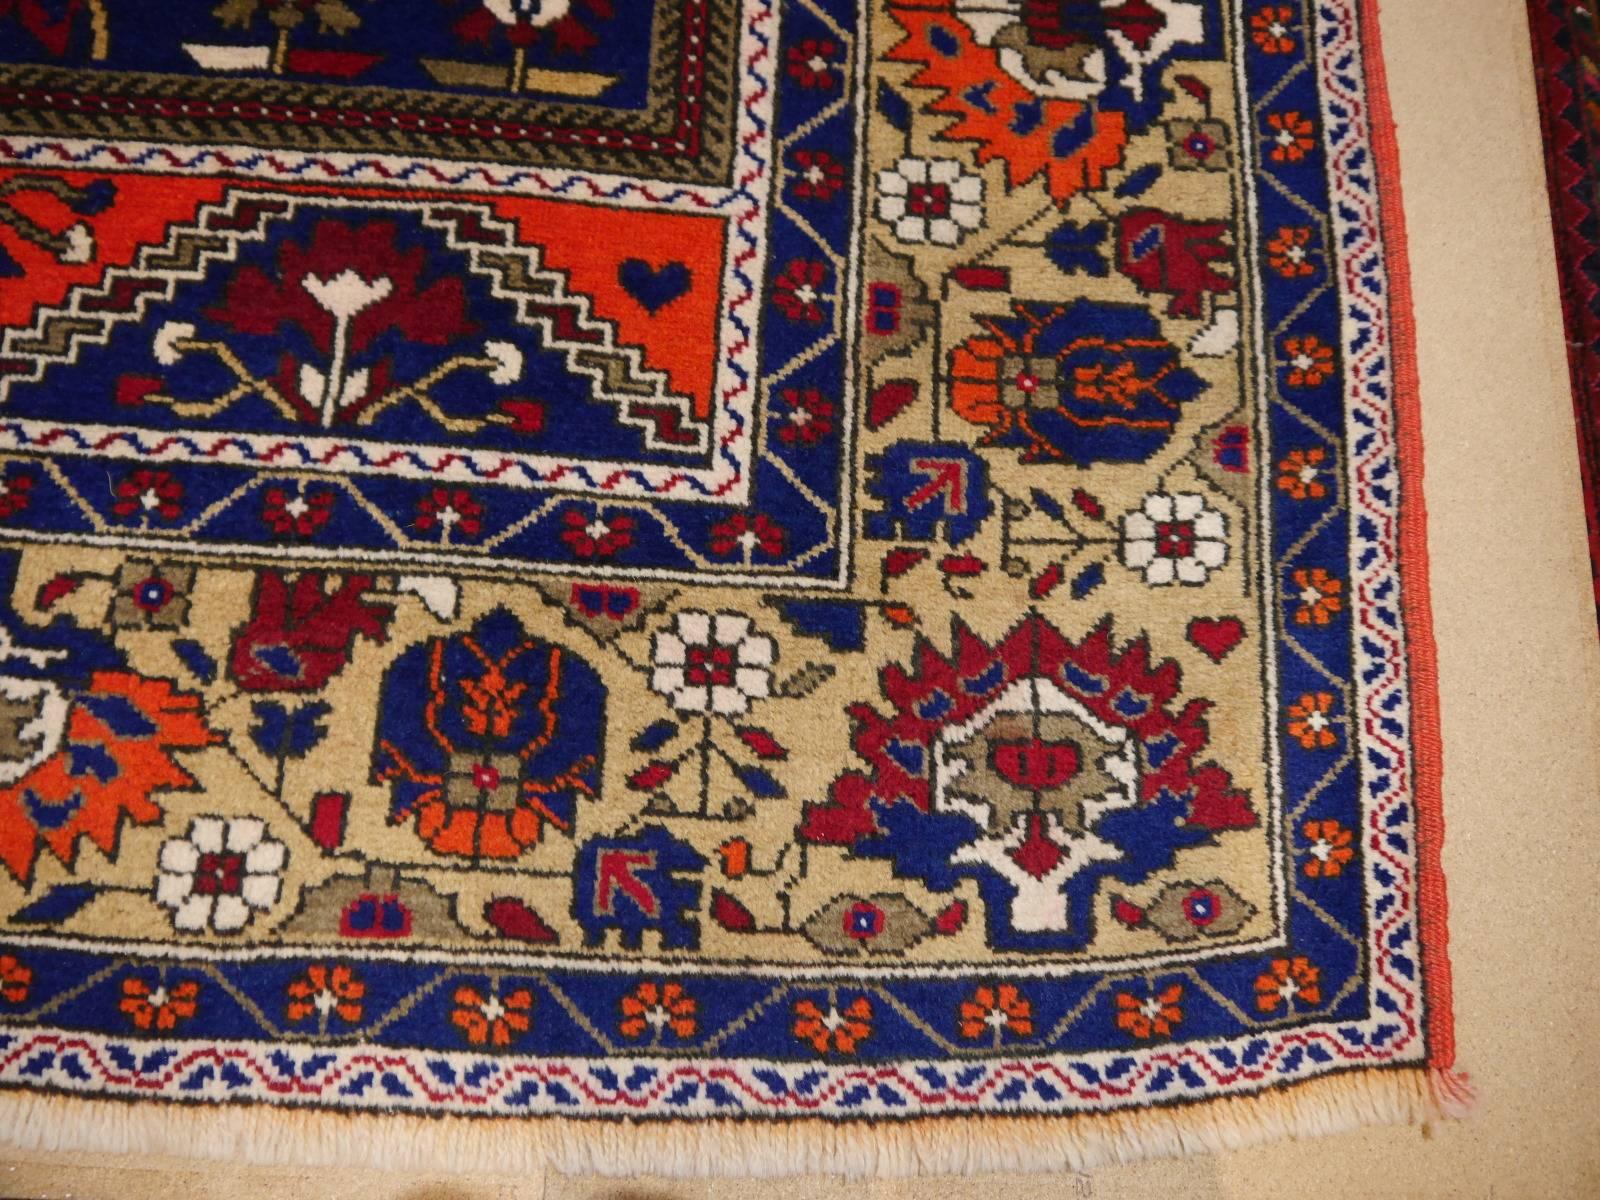 Vintage Turkish Taspinar Rug hand knotted blue and orange In Good Condition For Sale In Lohr, Bavaria, DE